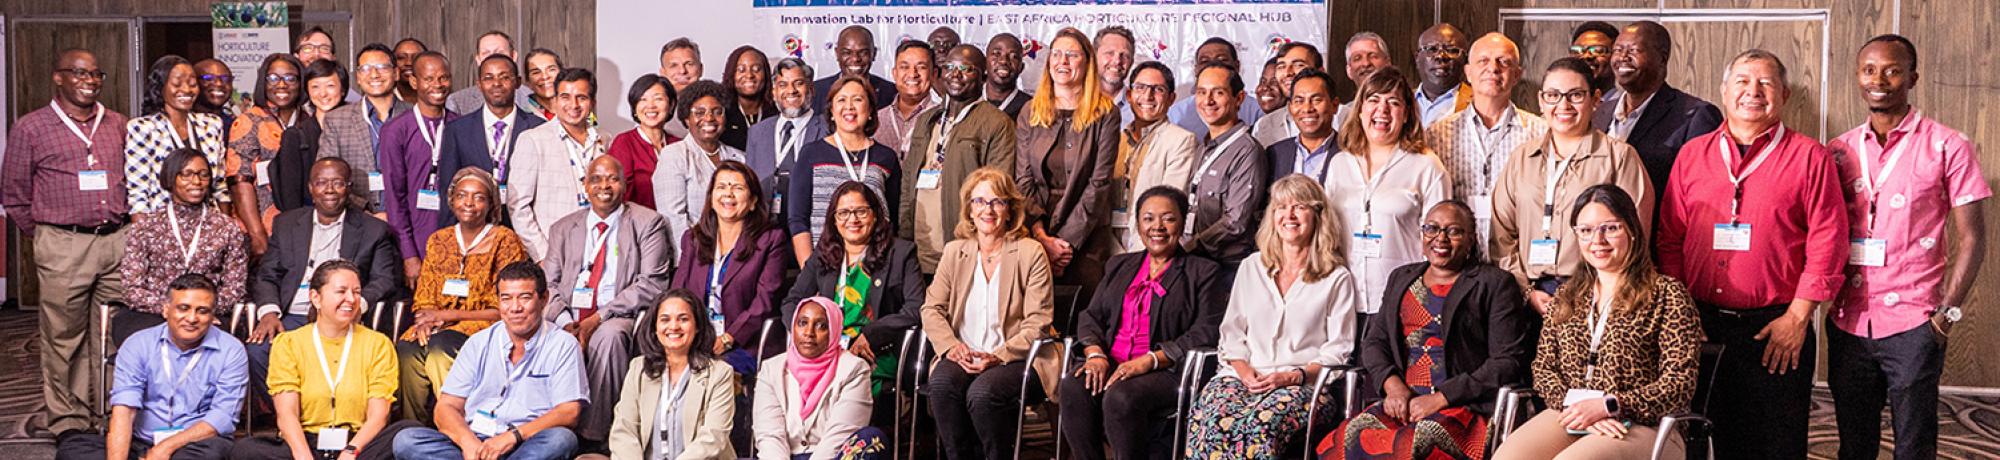 group photo - Horticulture Innovation Lab Network at 2023 annual meeting in Nairobi, Kenya